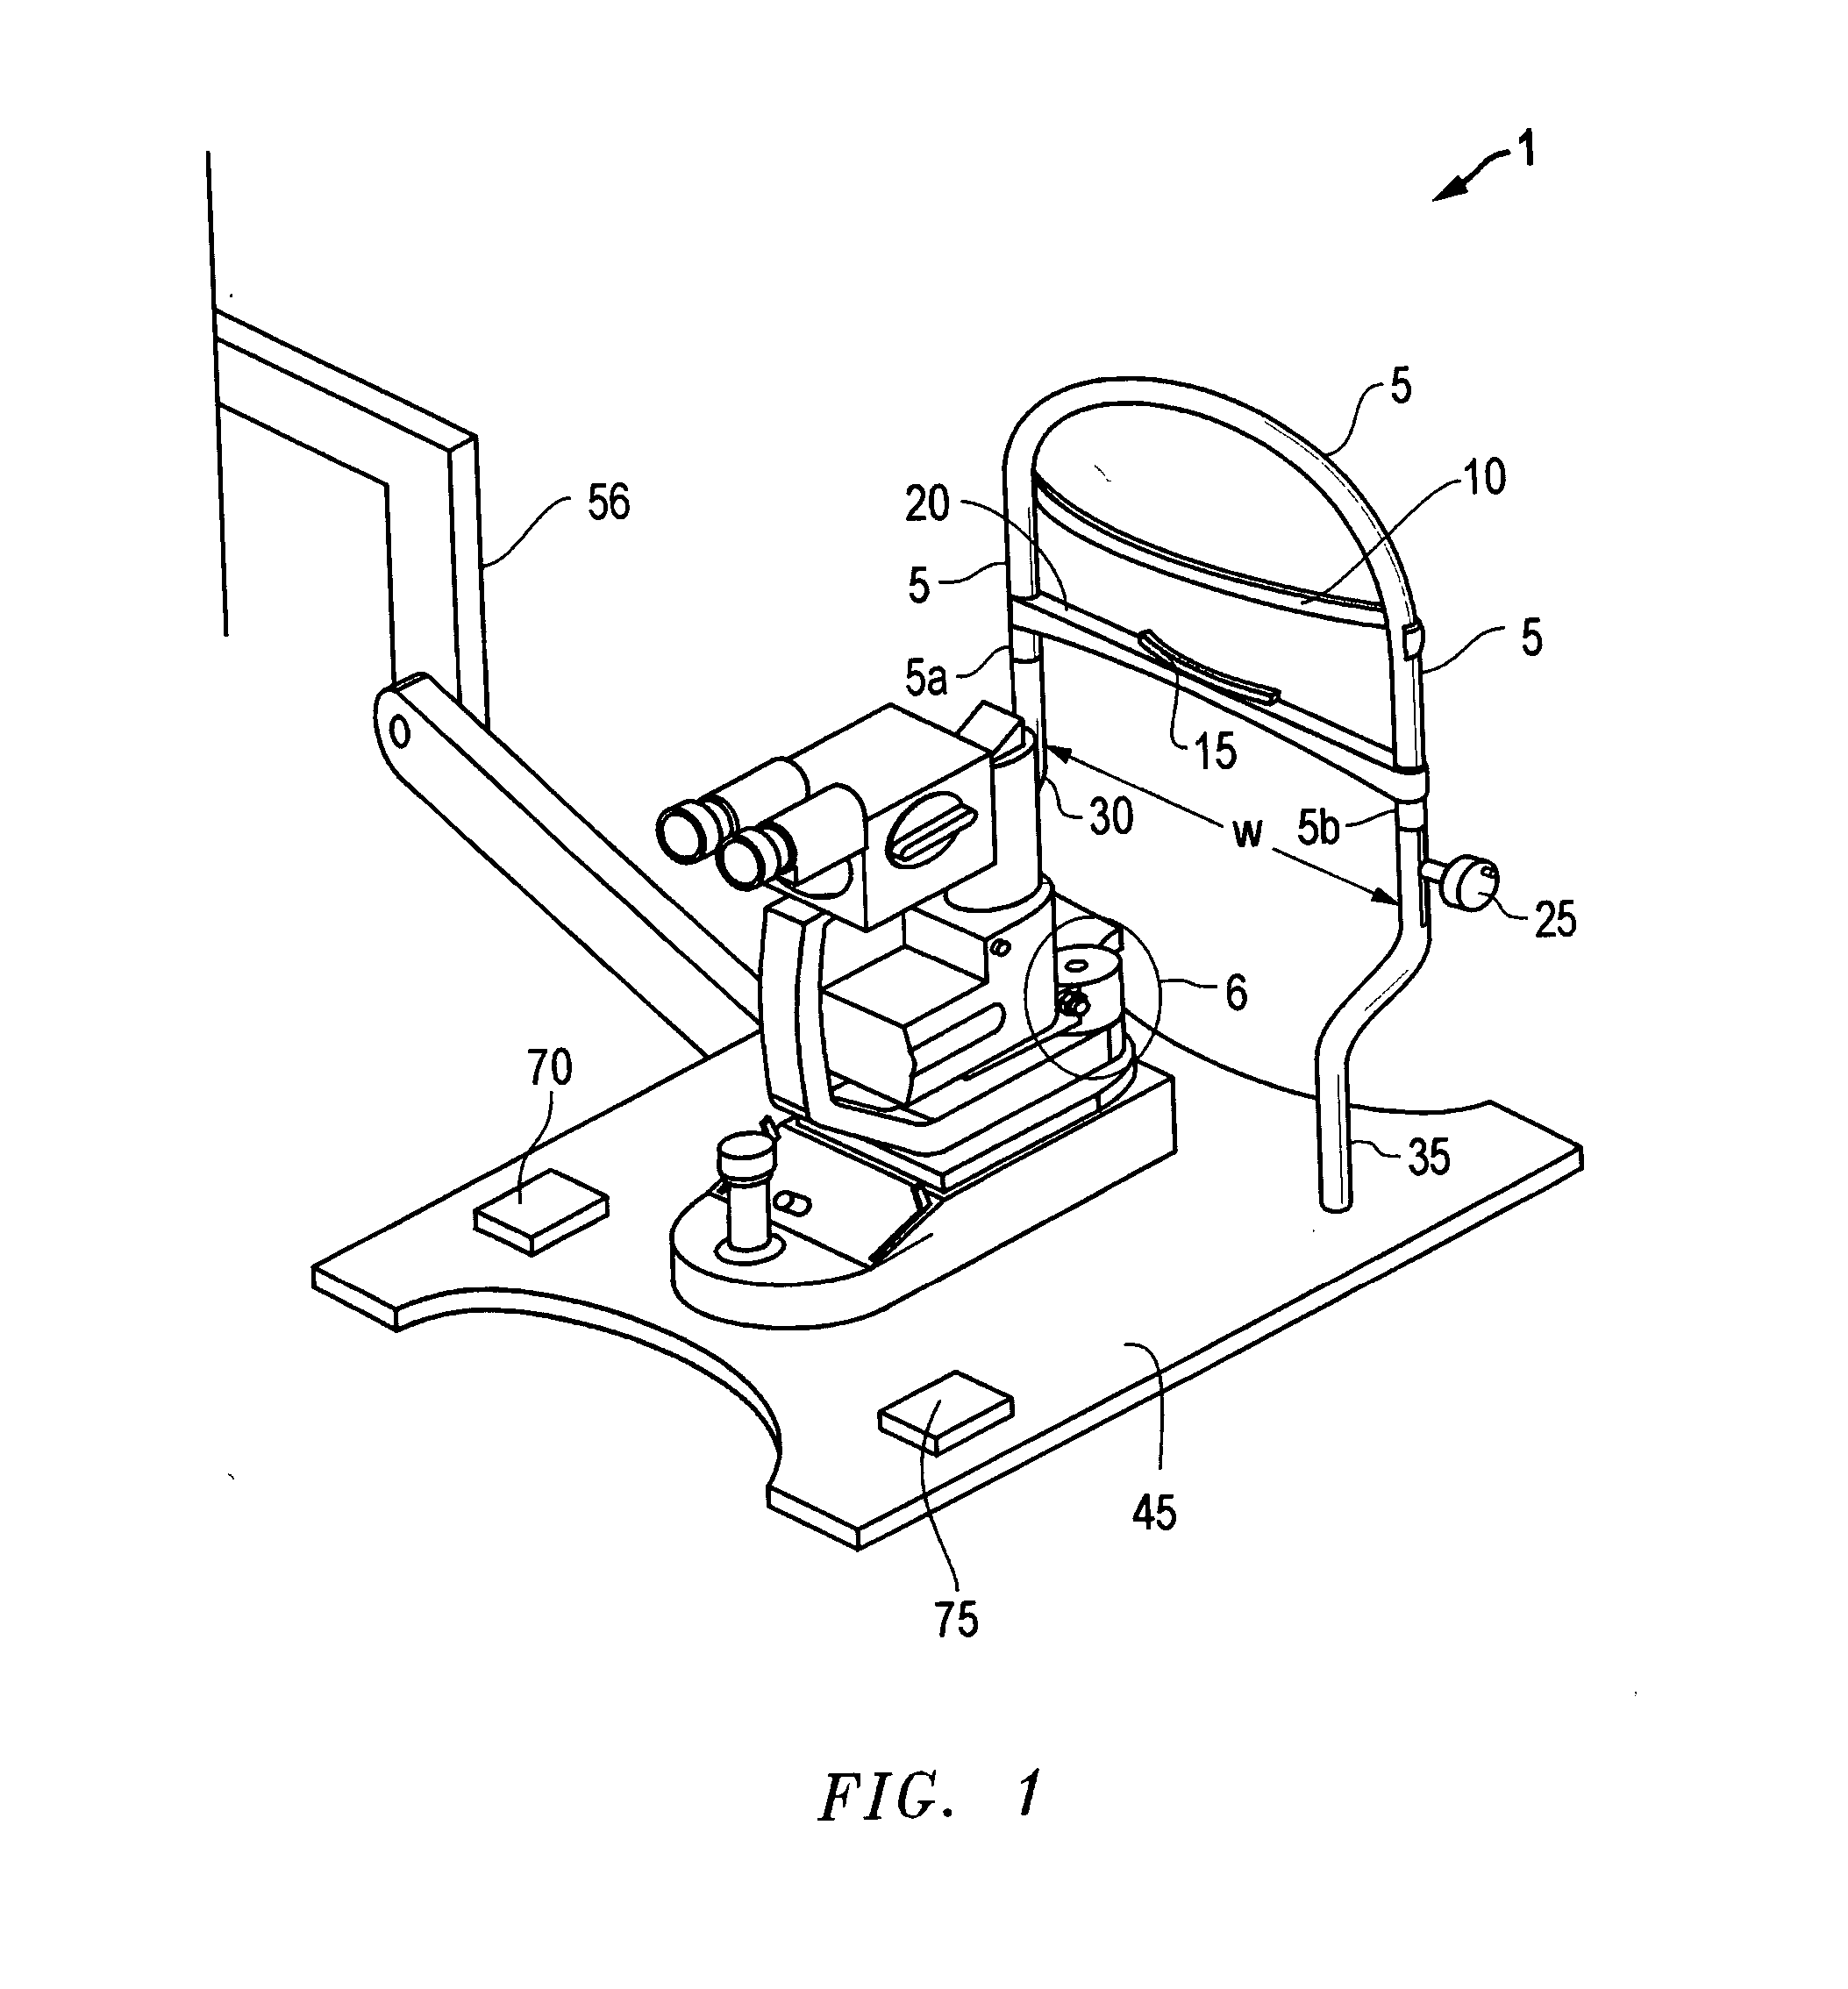 System, apparatus and method for accommodating opthalmic examination assemblies to patients